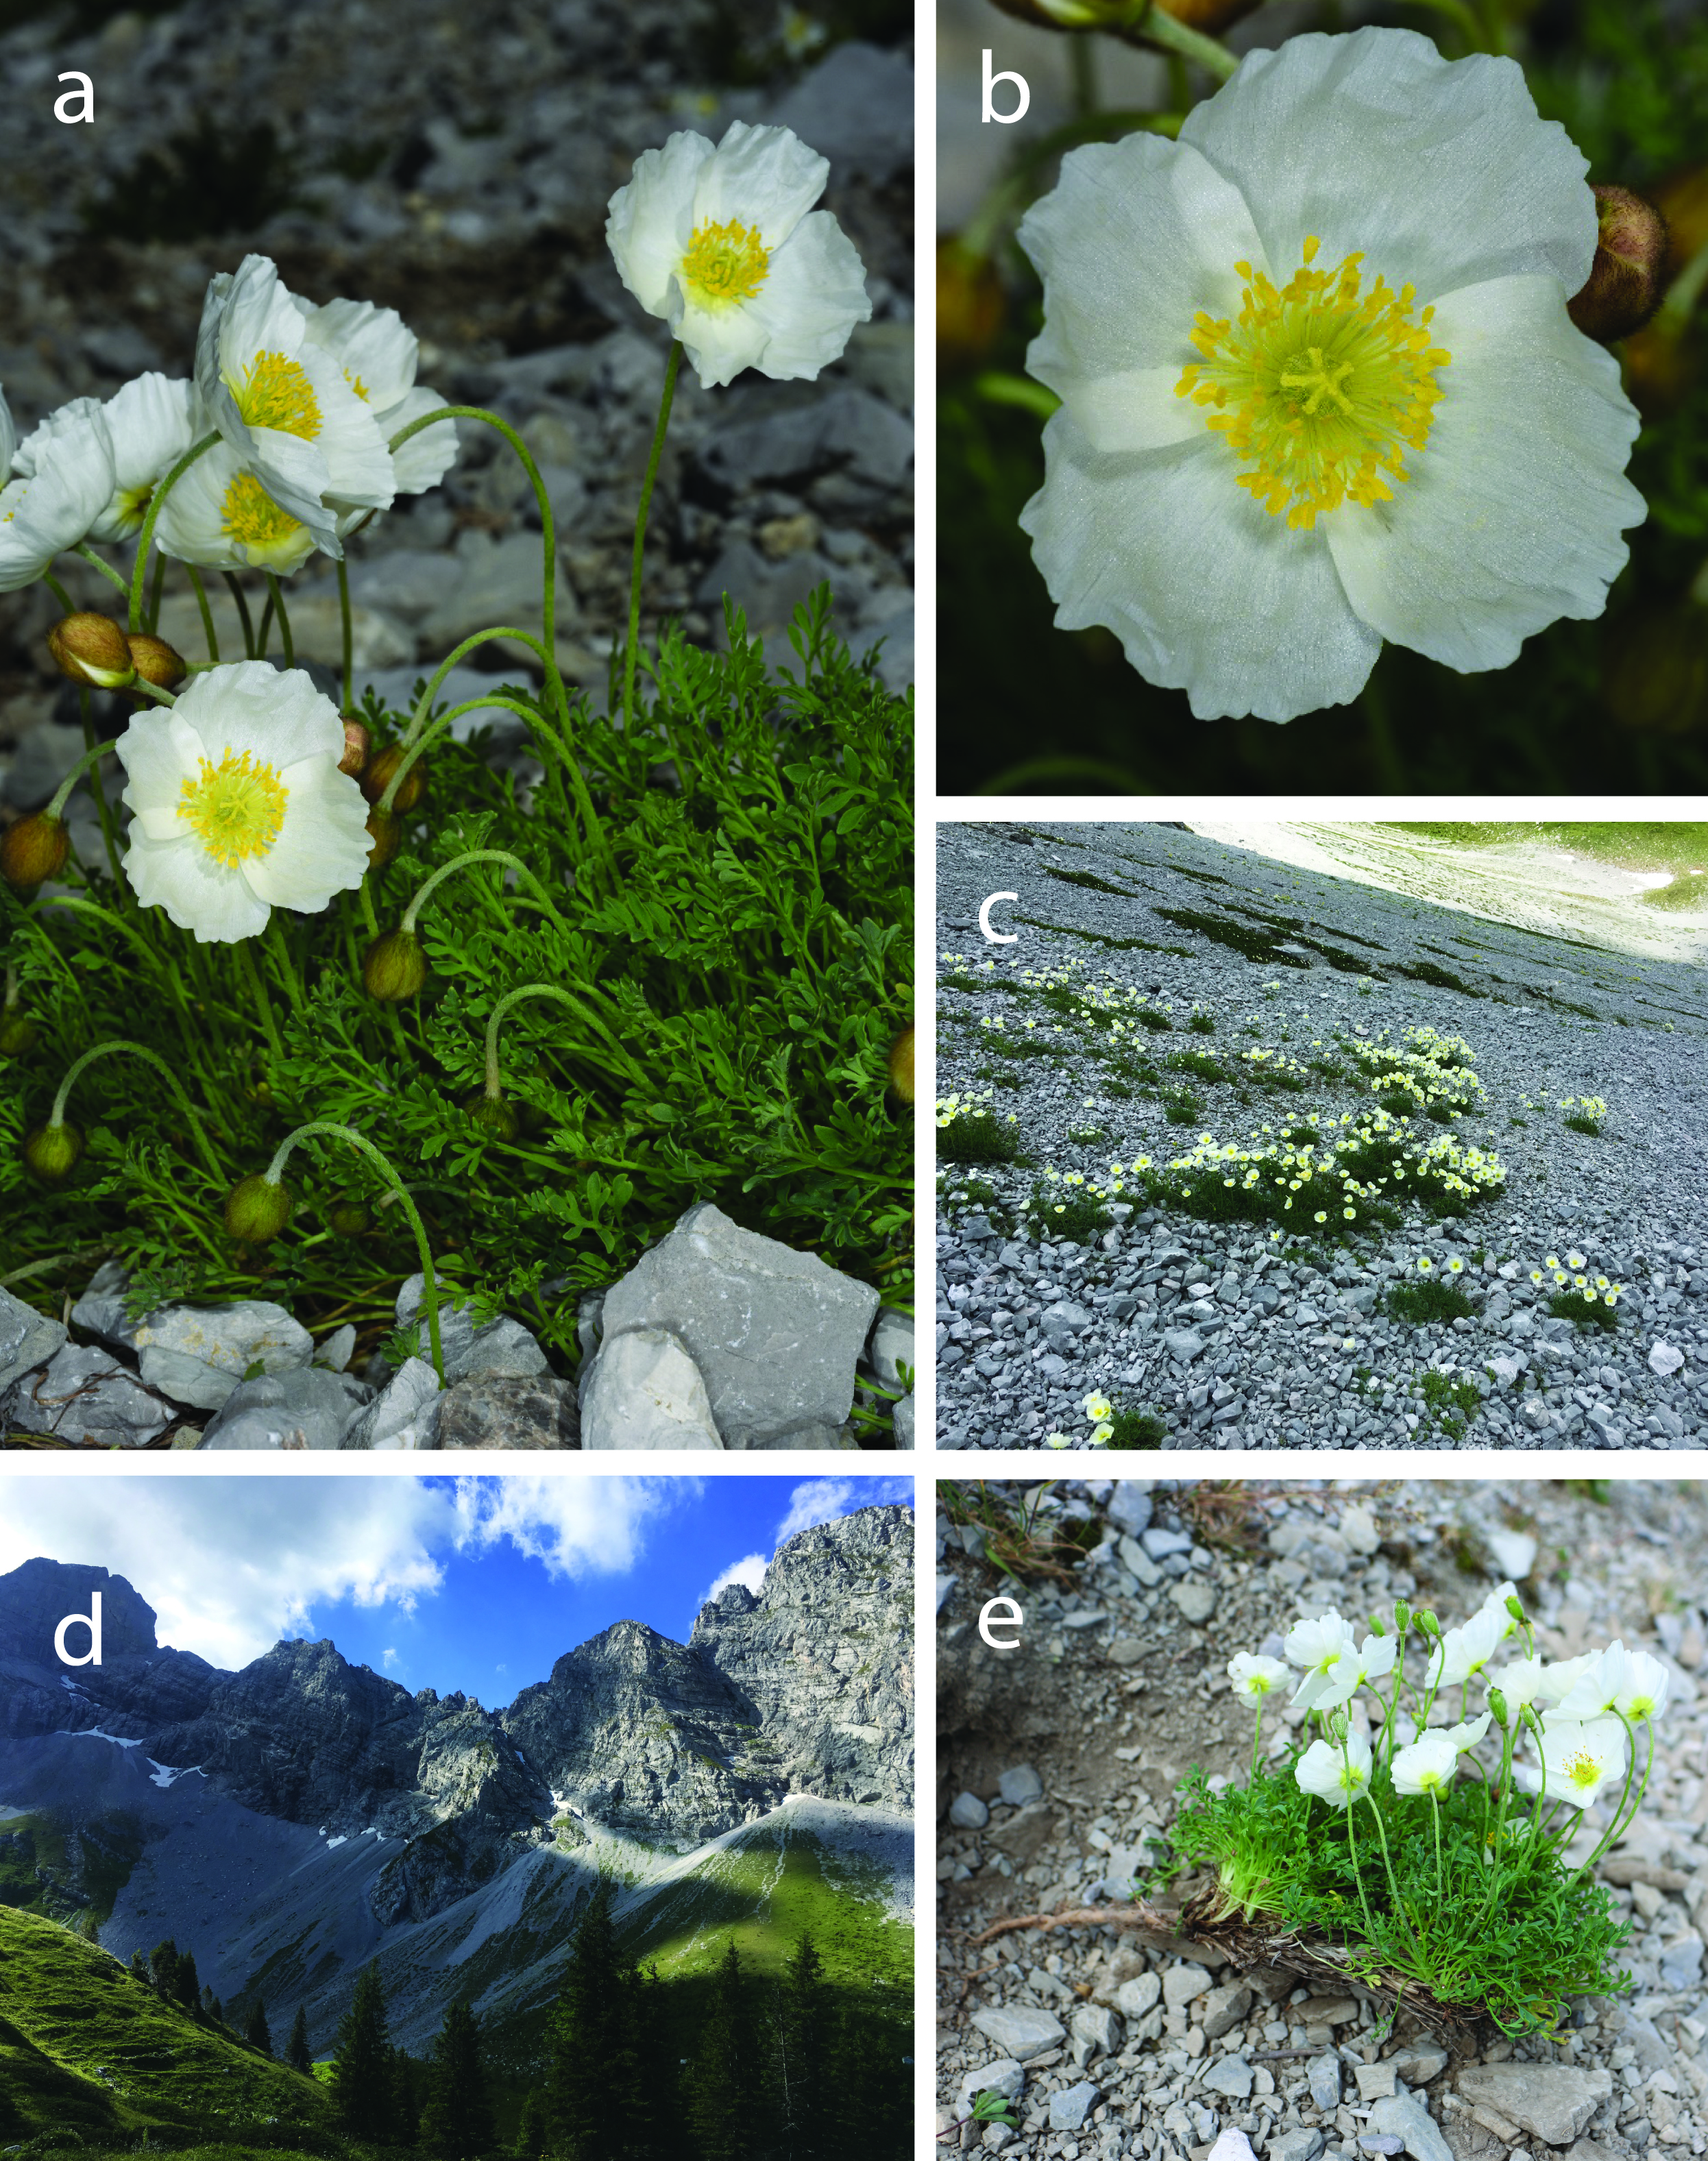 Diversity | Free Full-Text | Climate Change and Alpine Screes: No